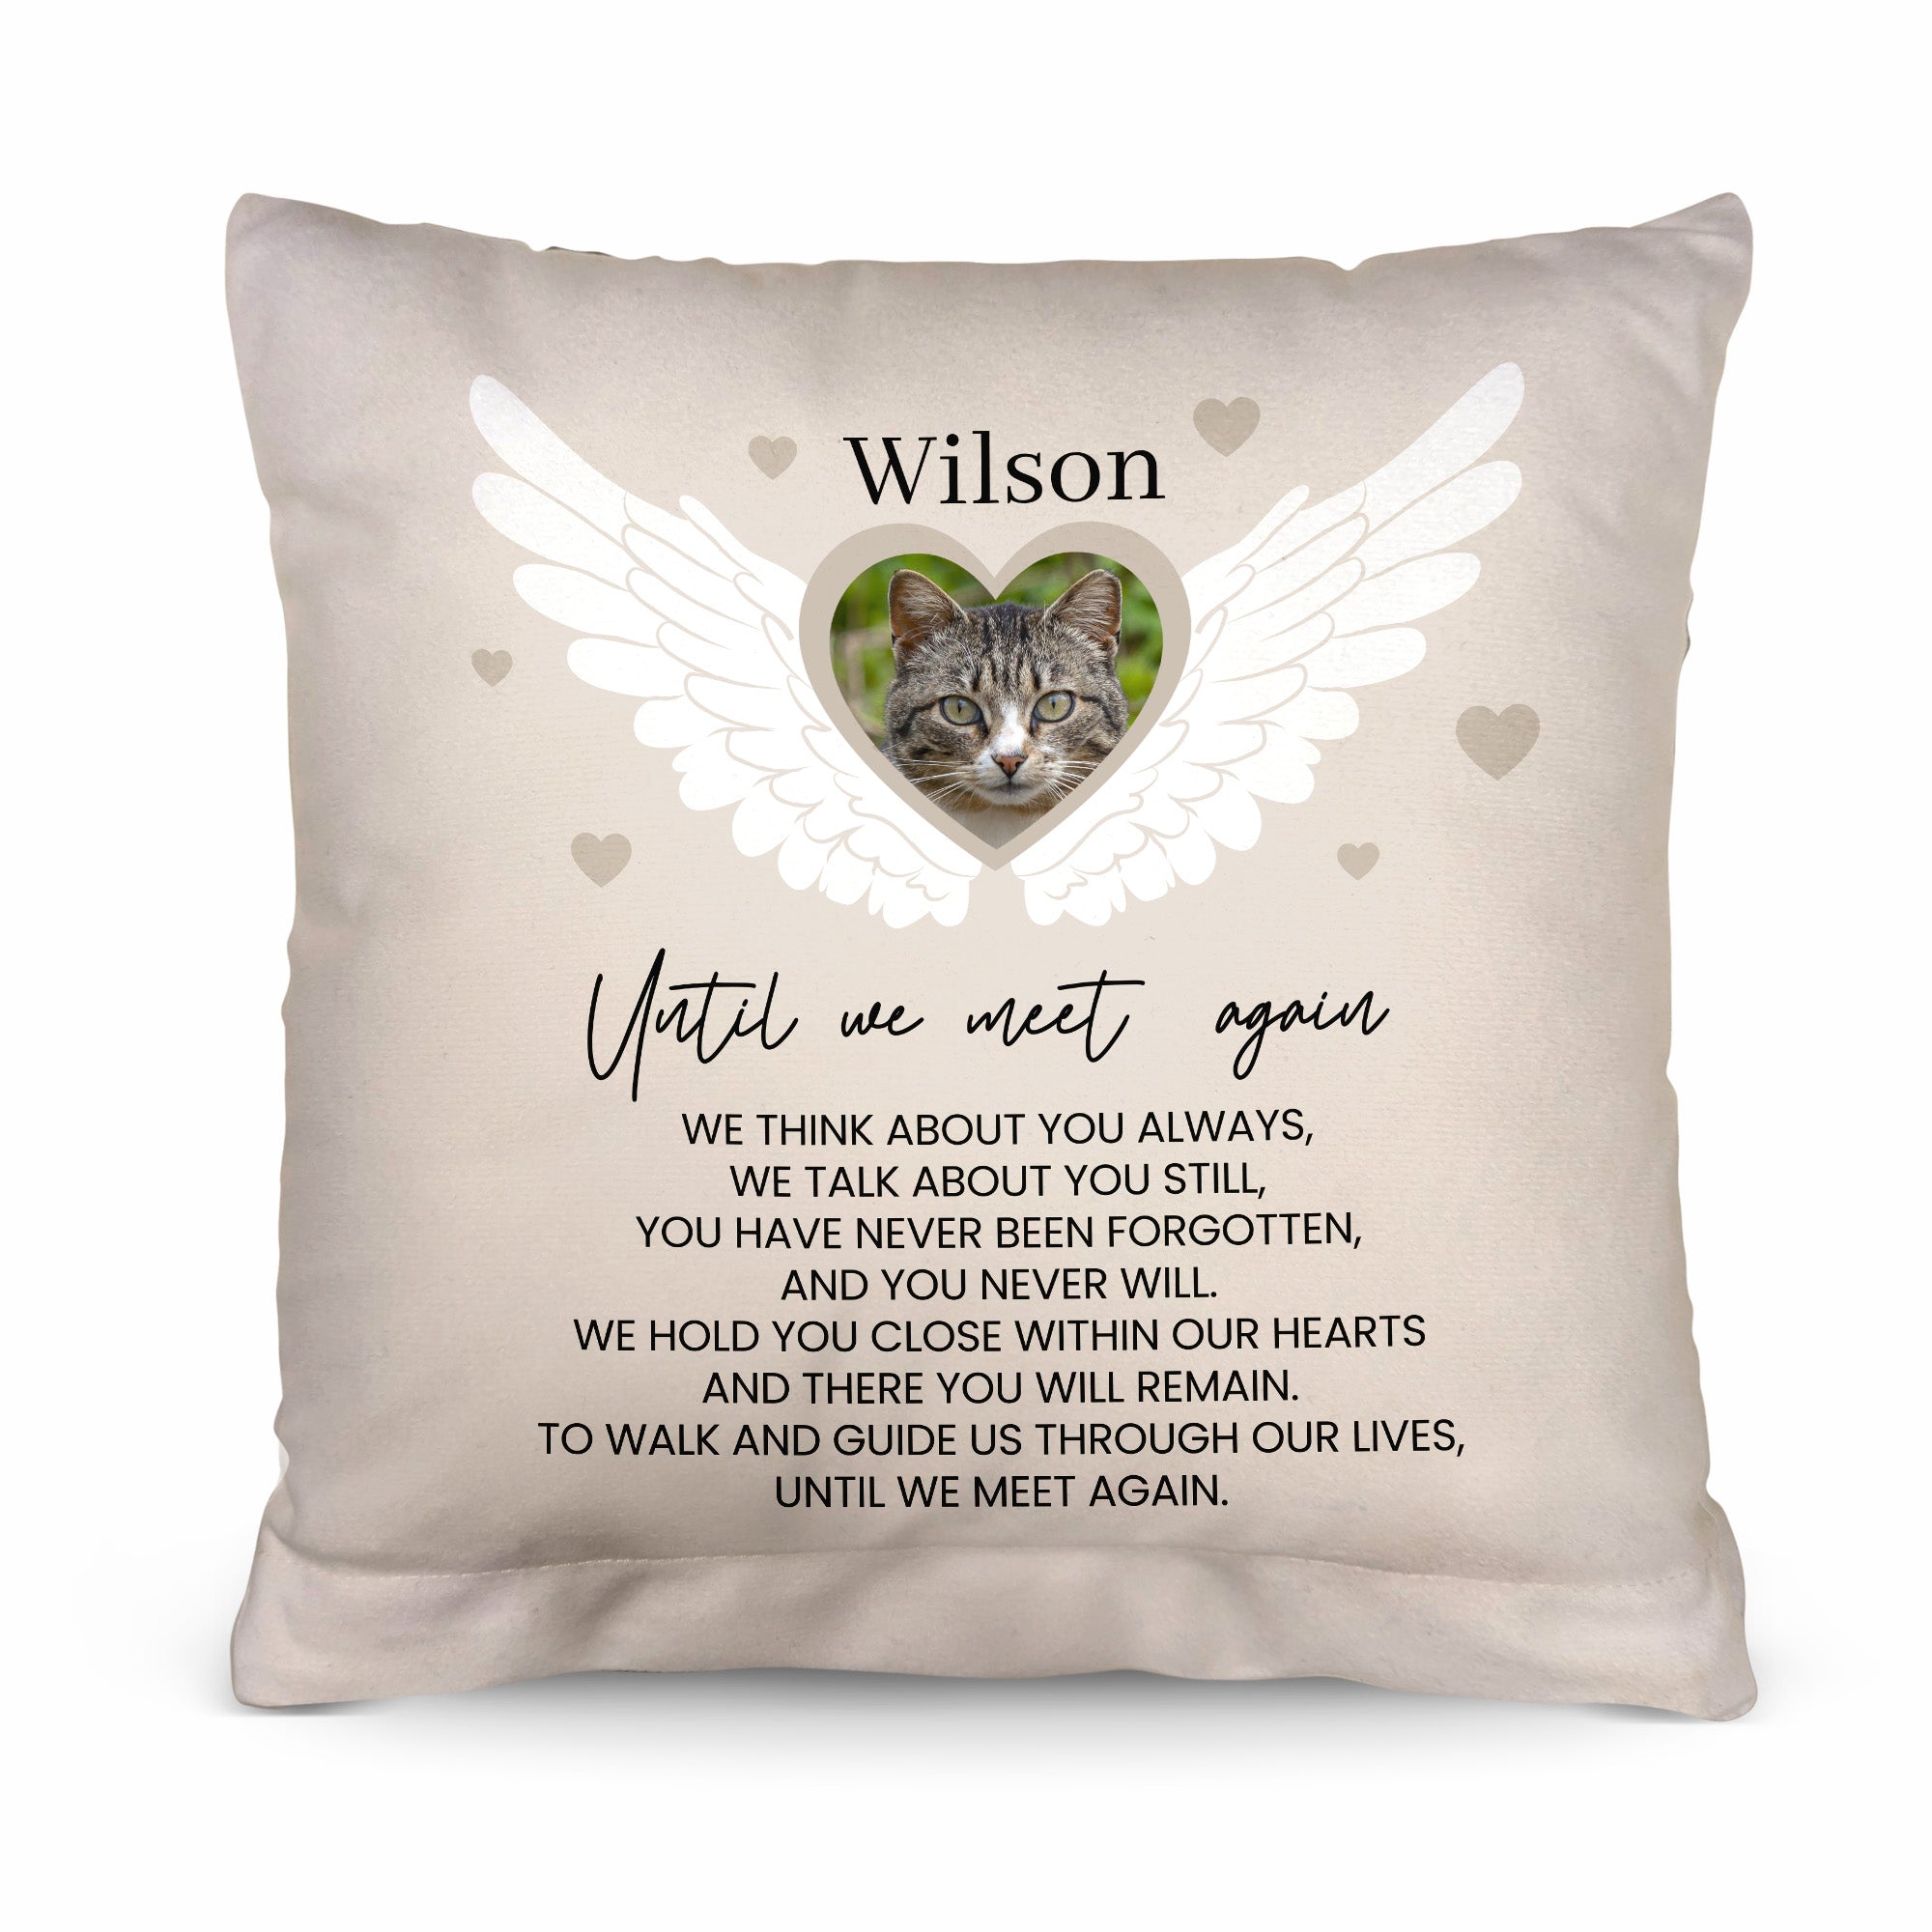 Until We Meet Again - Personalised Memory Cushion - Two Sizes